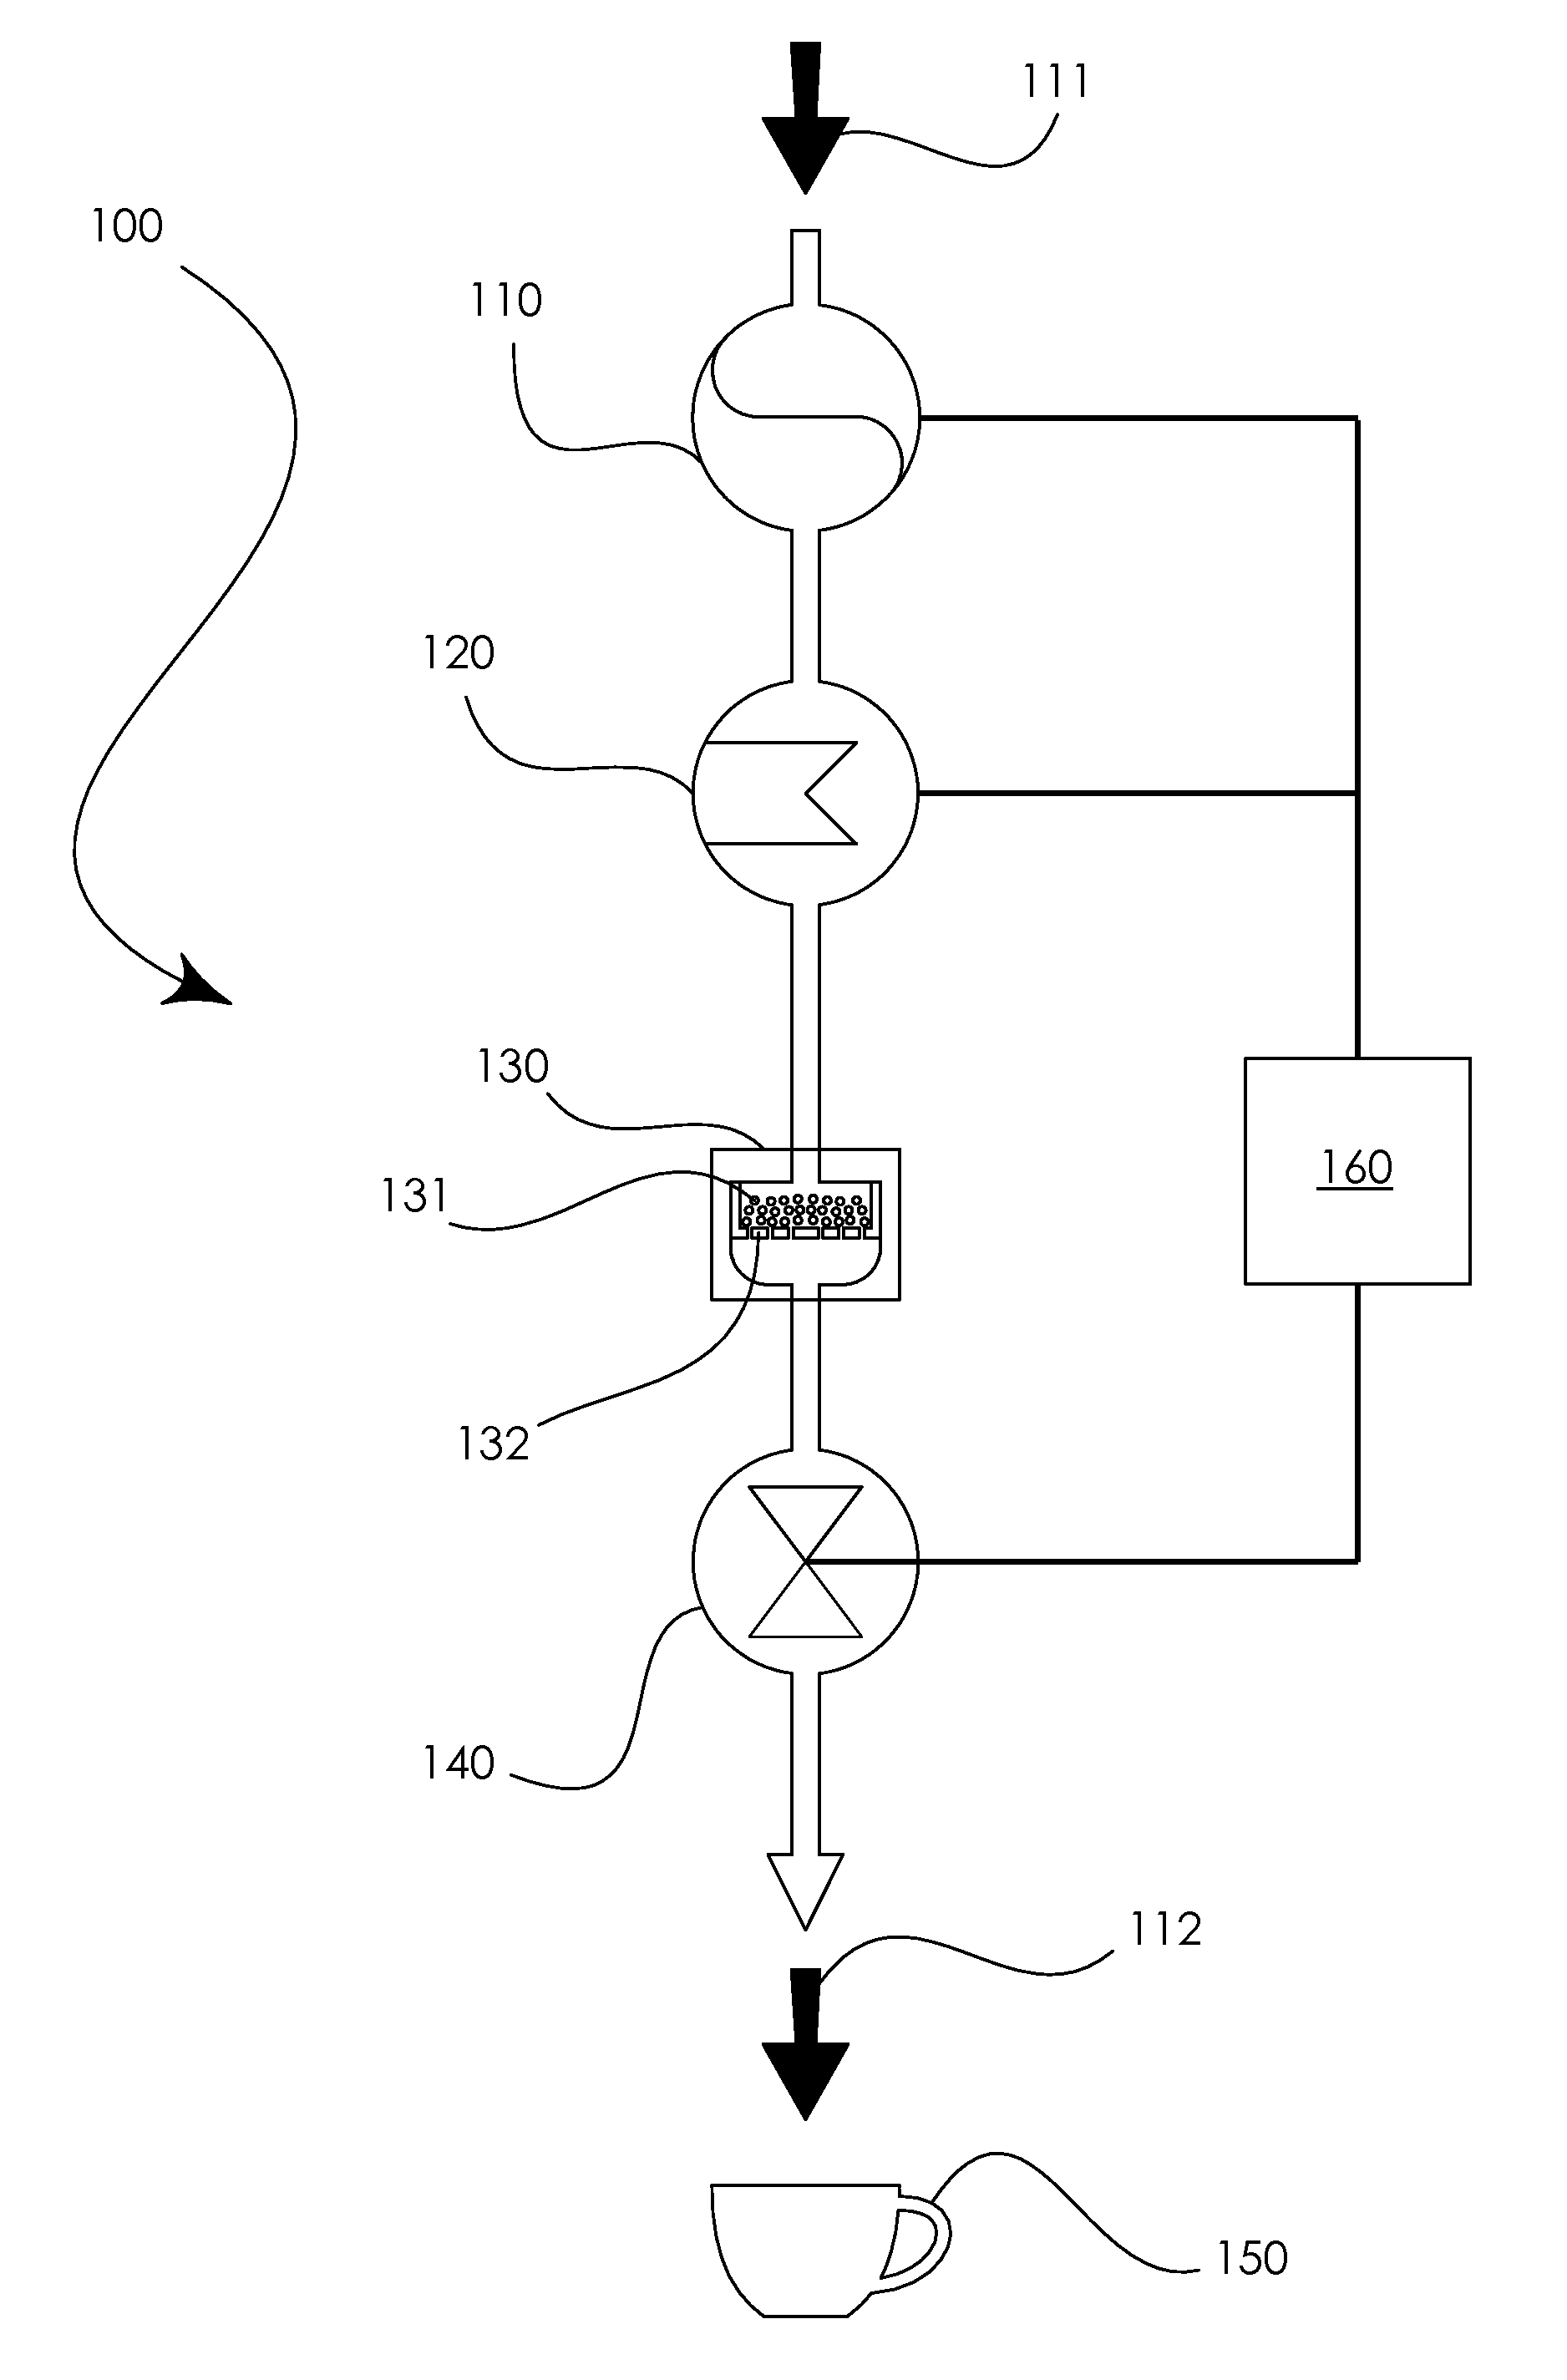 Device and system for brewing infused beverages